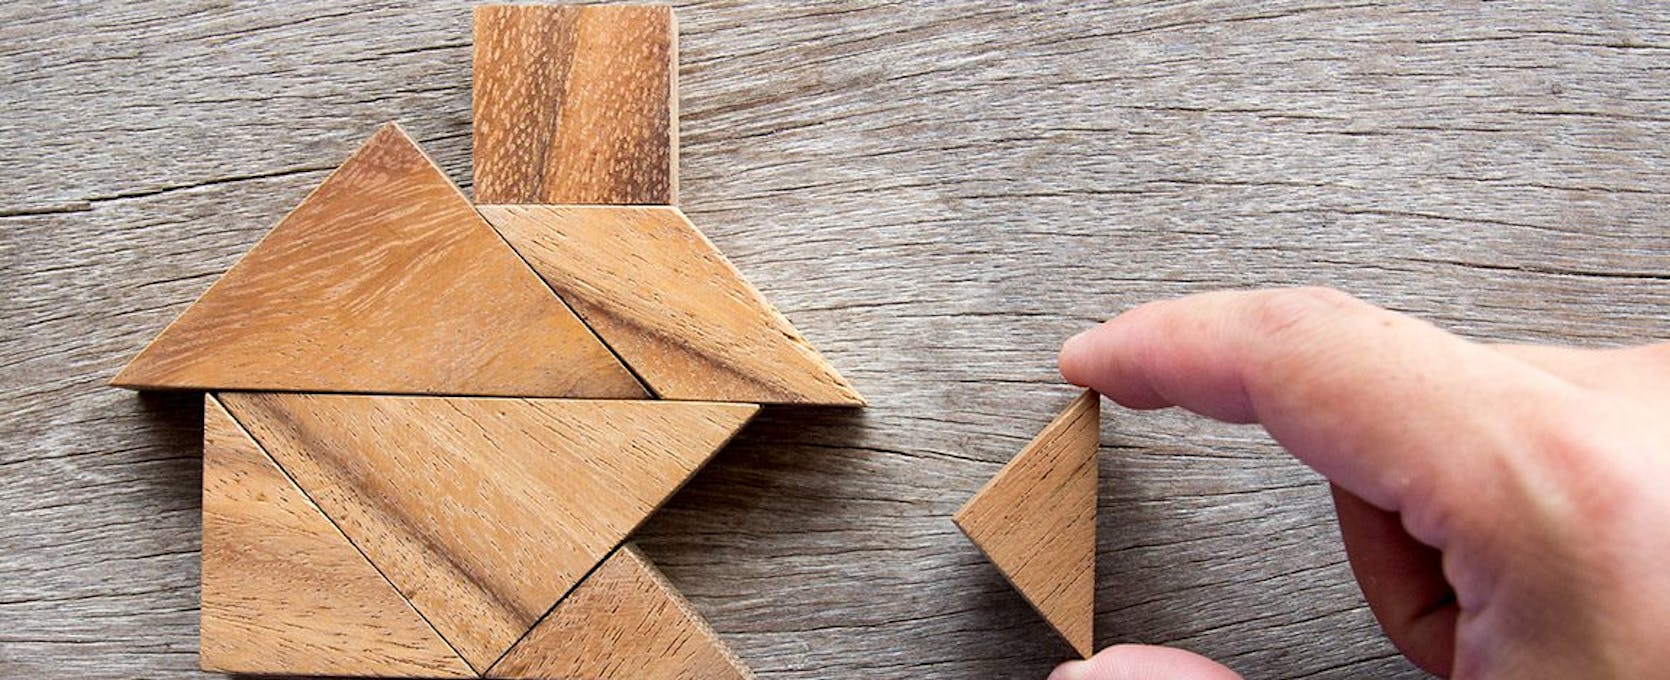 Wooden tangram puzzle in the shape of a house